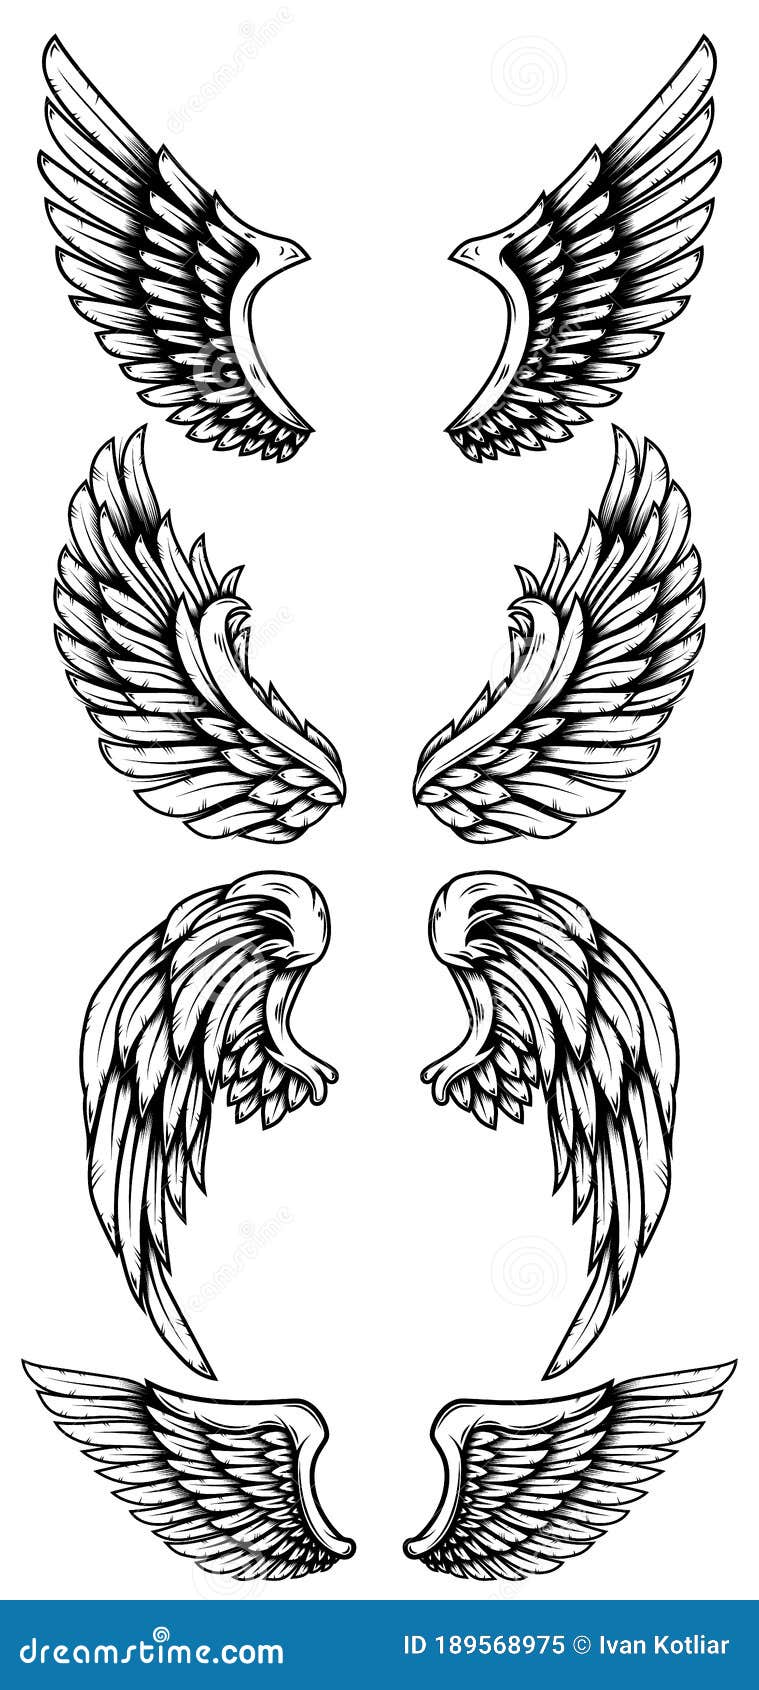 60040 Eagle Wing Tattoo Images Stock Photos  Vectors  Shutterstock